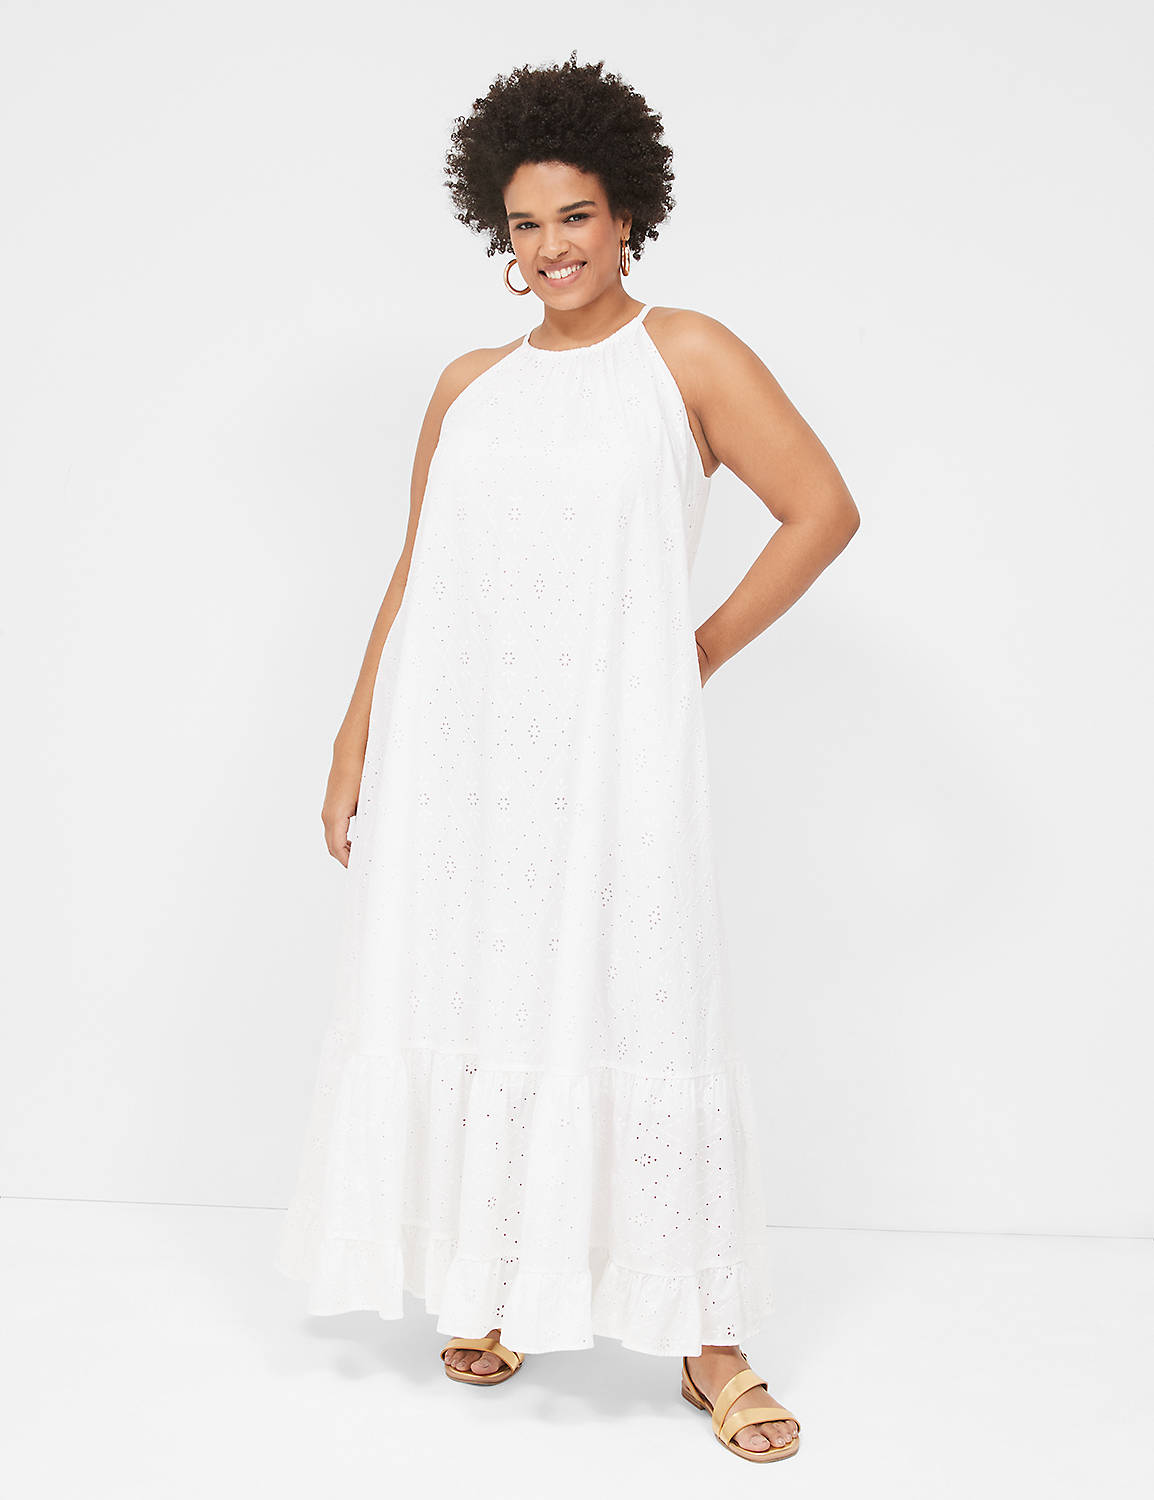 Bare Halter Tiered Maxi 1139723 Product Image 4